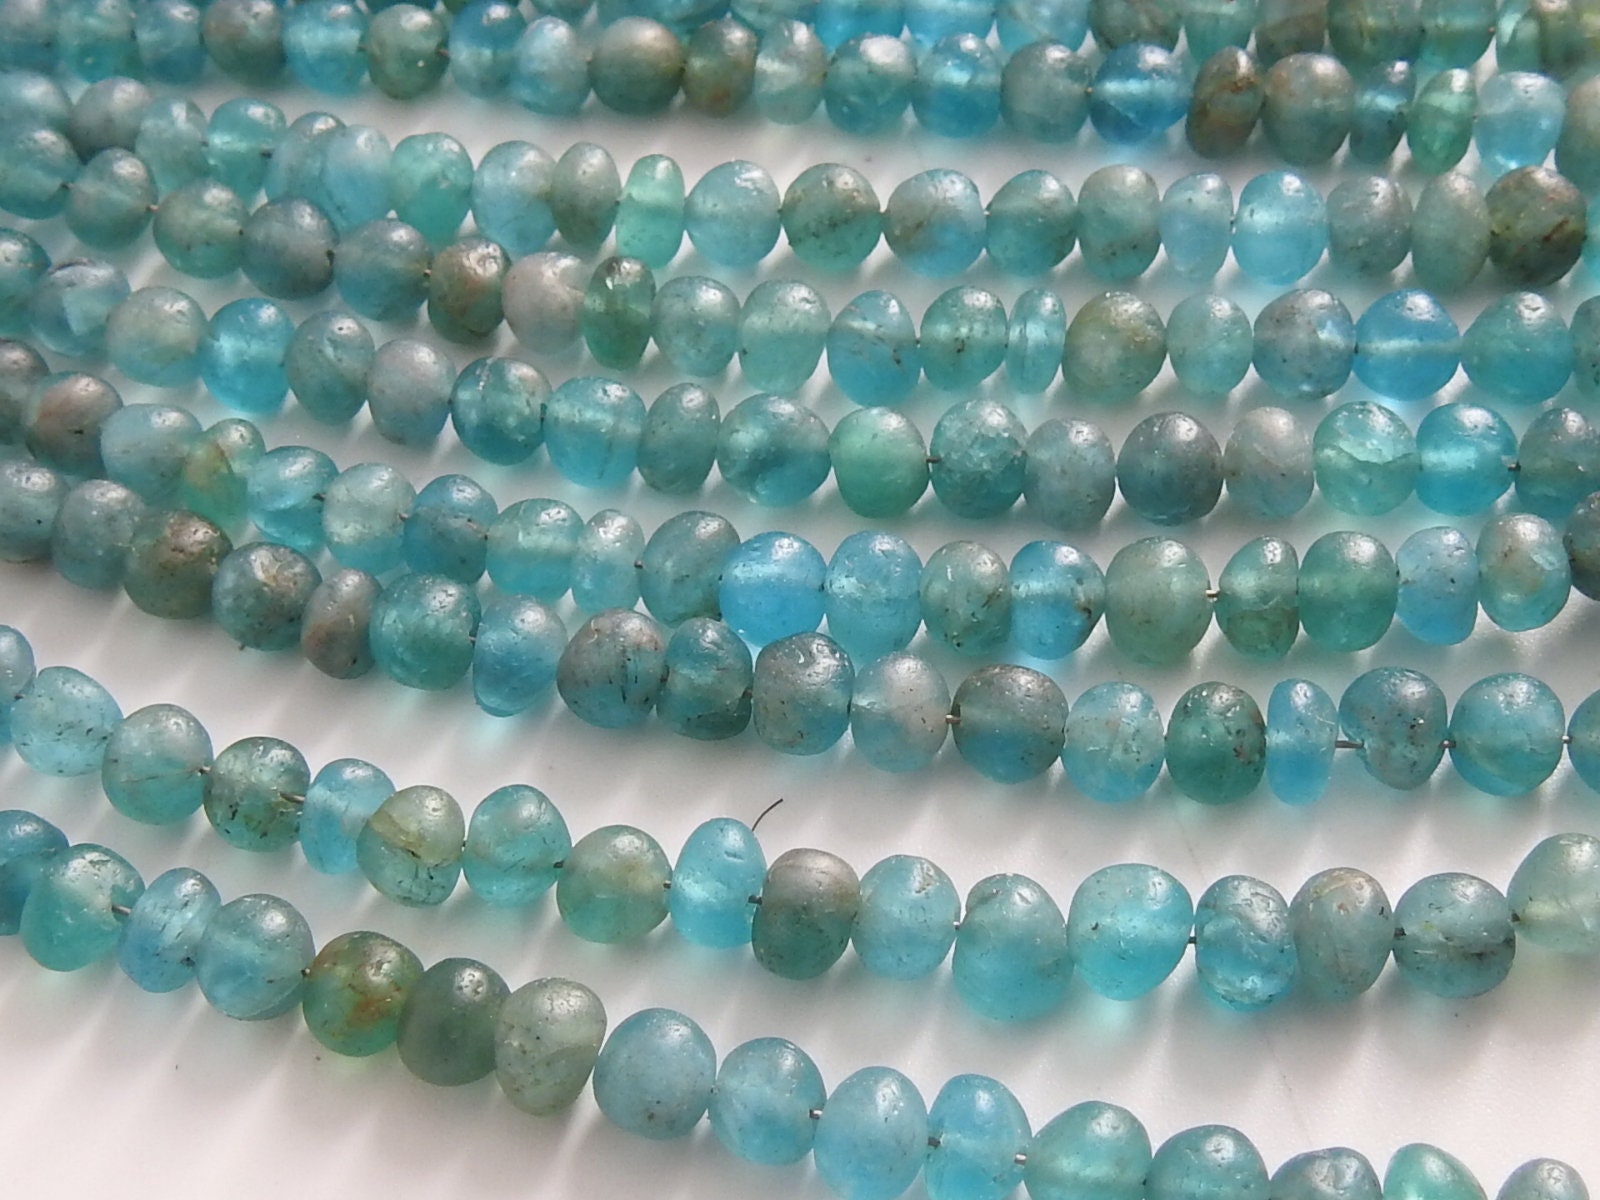 Sky Blue Apatite Roundel Bead,Smooth,Handmade,Matte Polished,Loose Bead,Necklace,For Making Jewelry,Wholesaler,Supplies 100%Natural B2 | Save 33% - Rajasthan Living 15